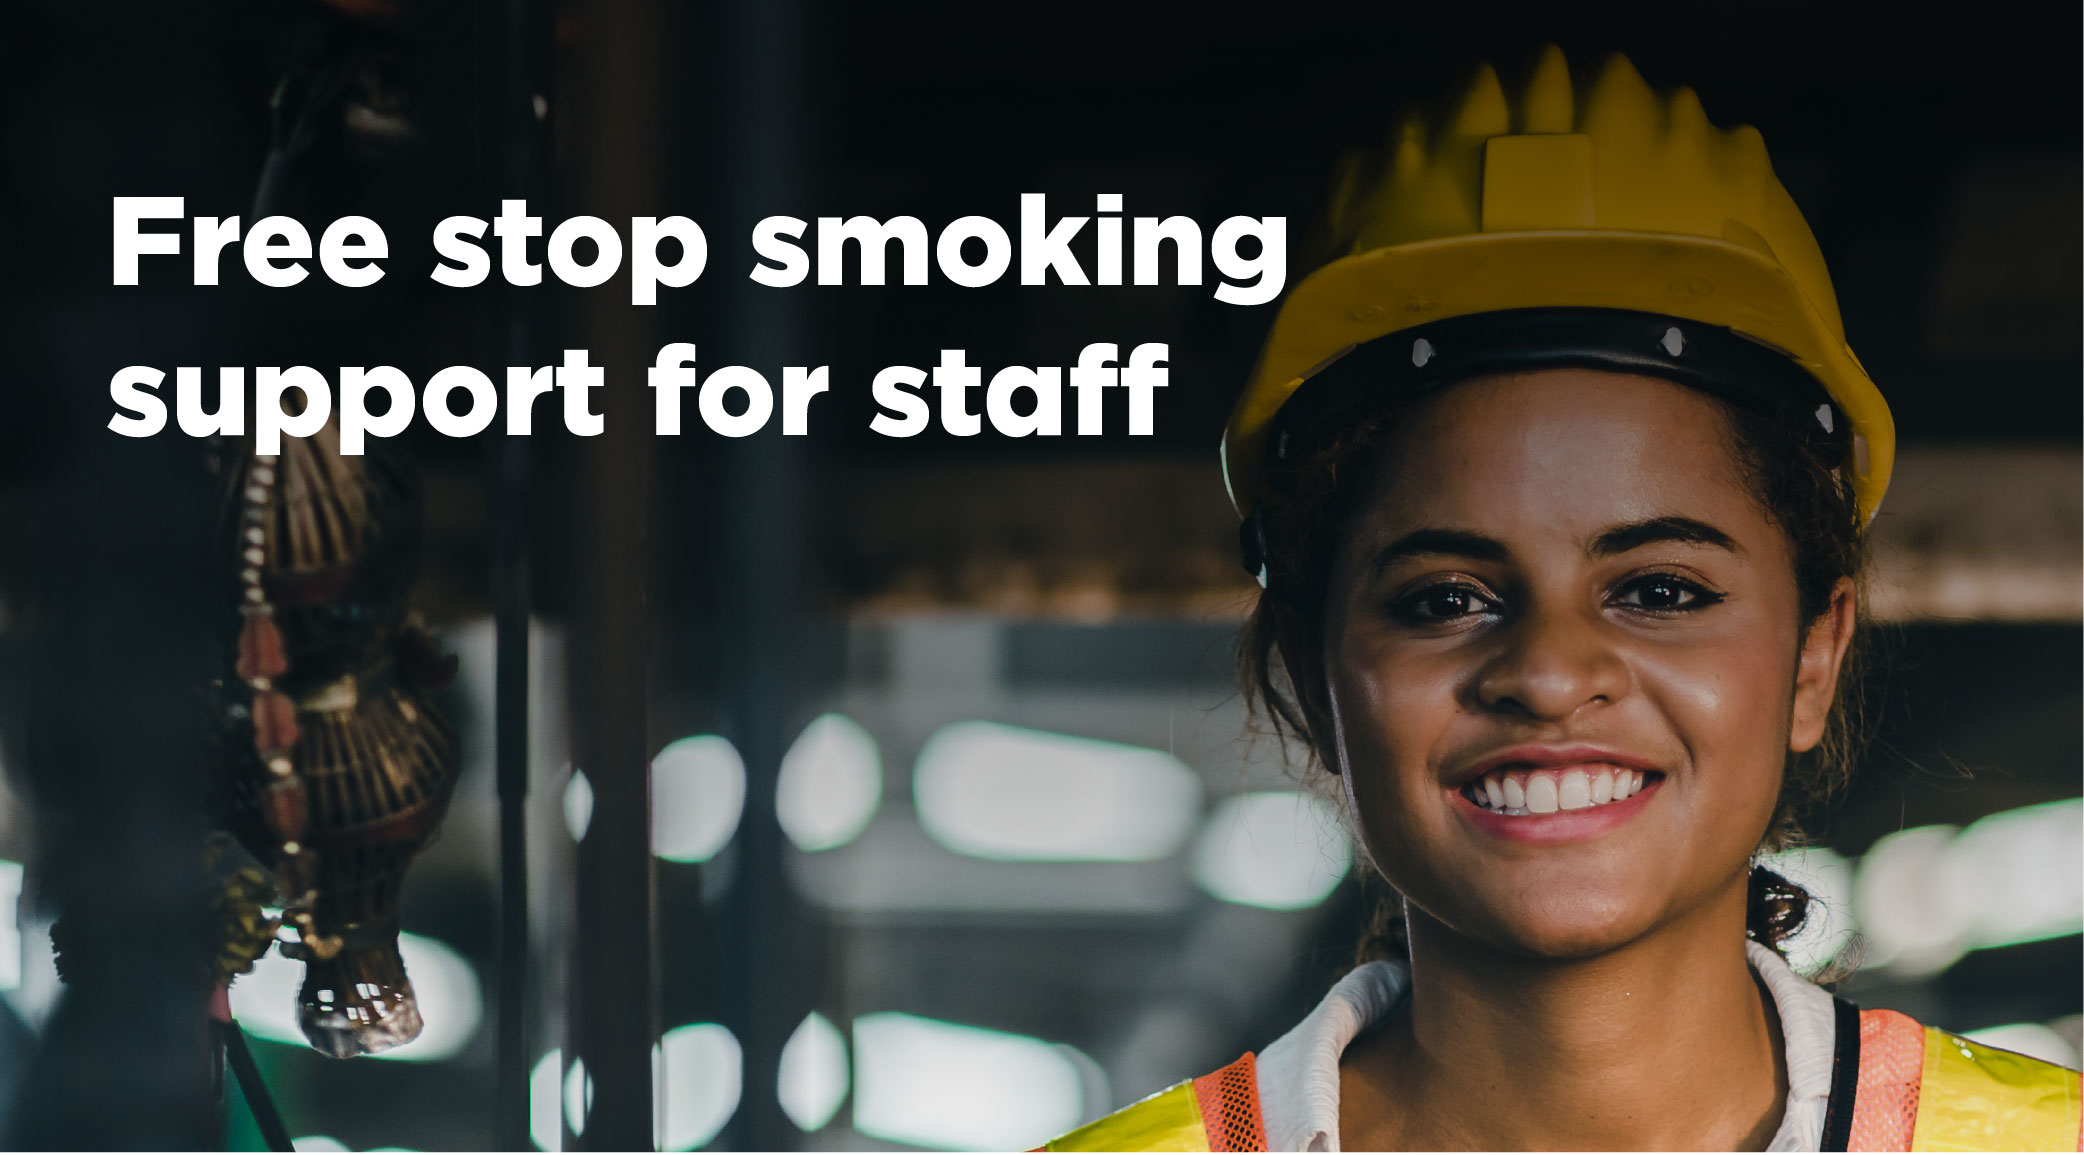 A woman wearing a hard hat and high-vis jacket. The words Free stop smoking support for staff